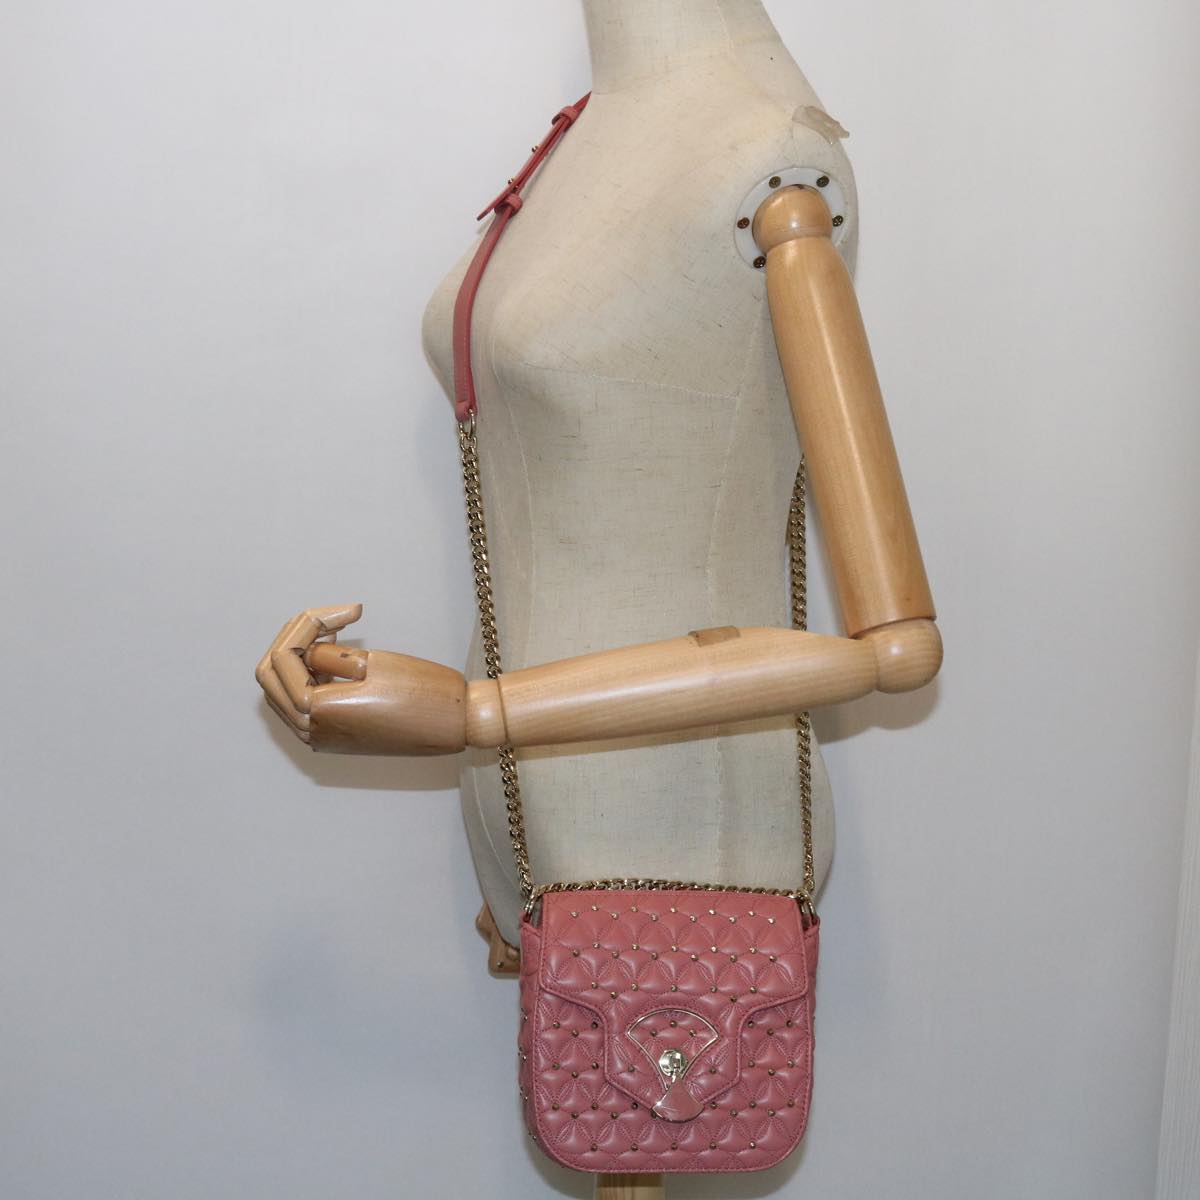 Bvlgari Shoulder Bag Leather Pink 385430 Auth 56753a